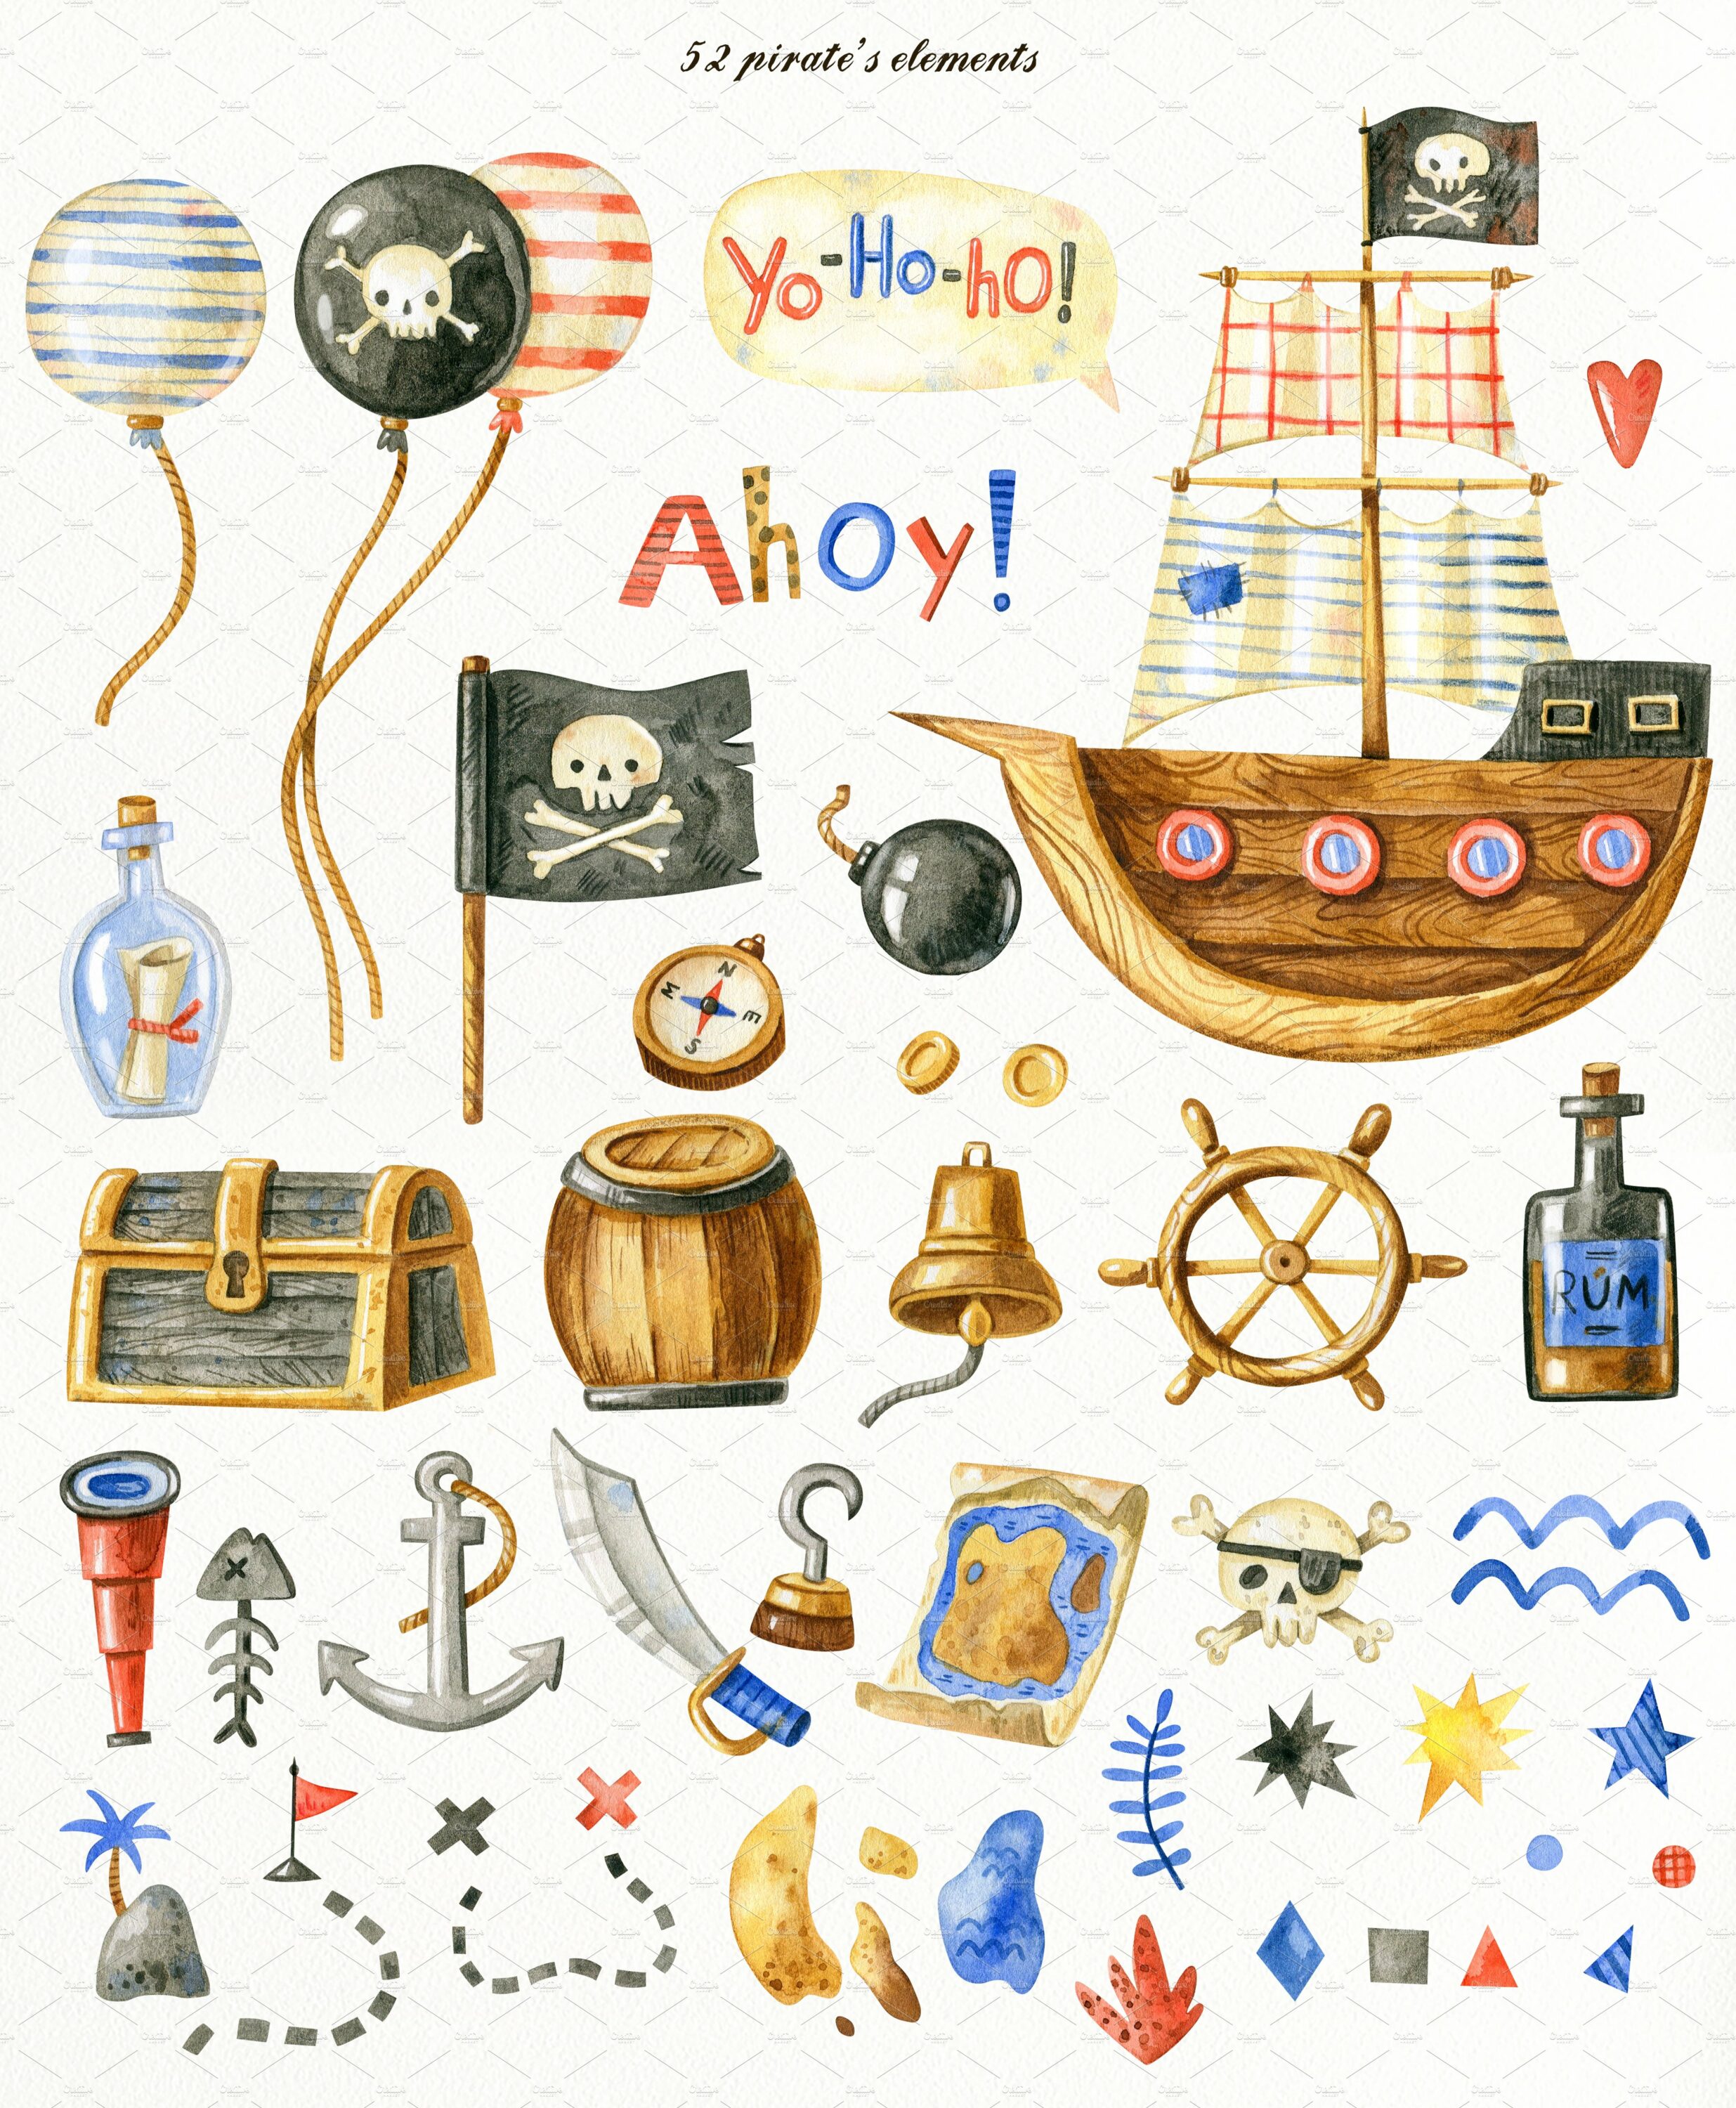 Lots of pirate's elements.